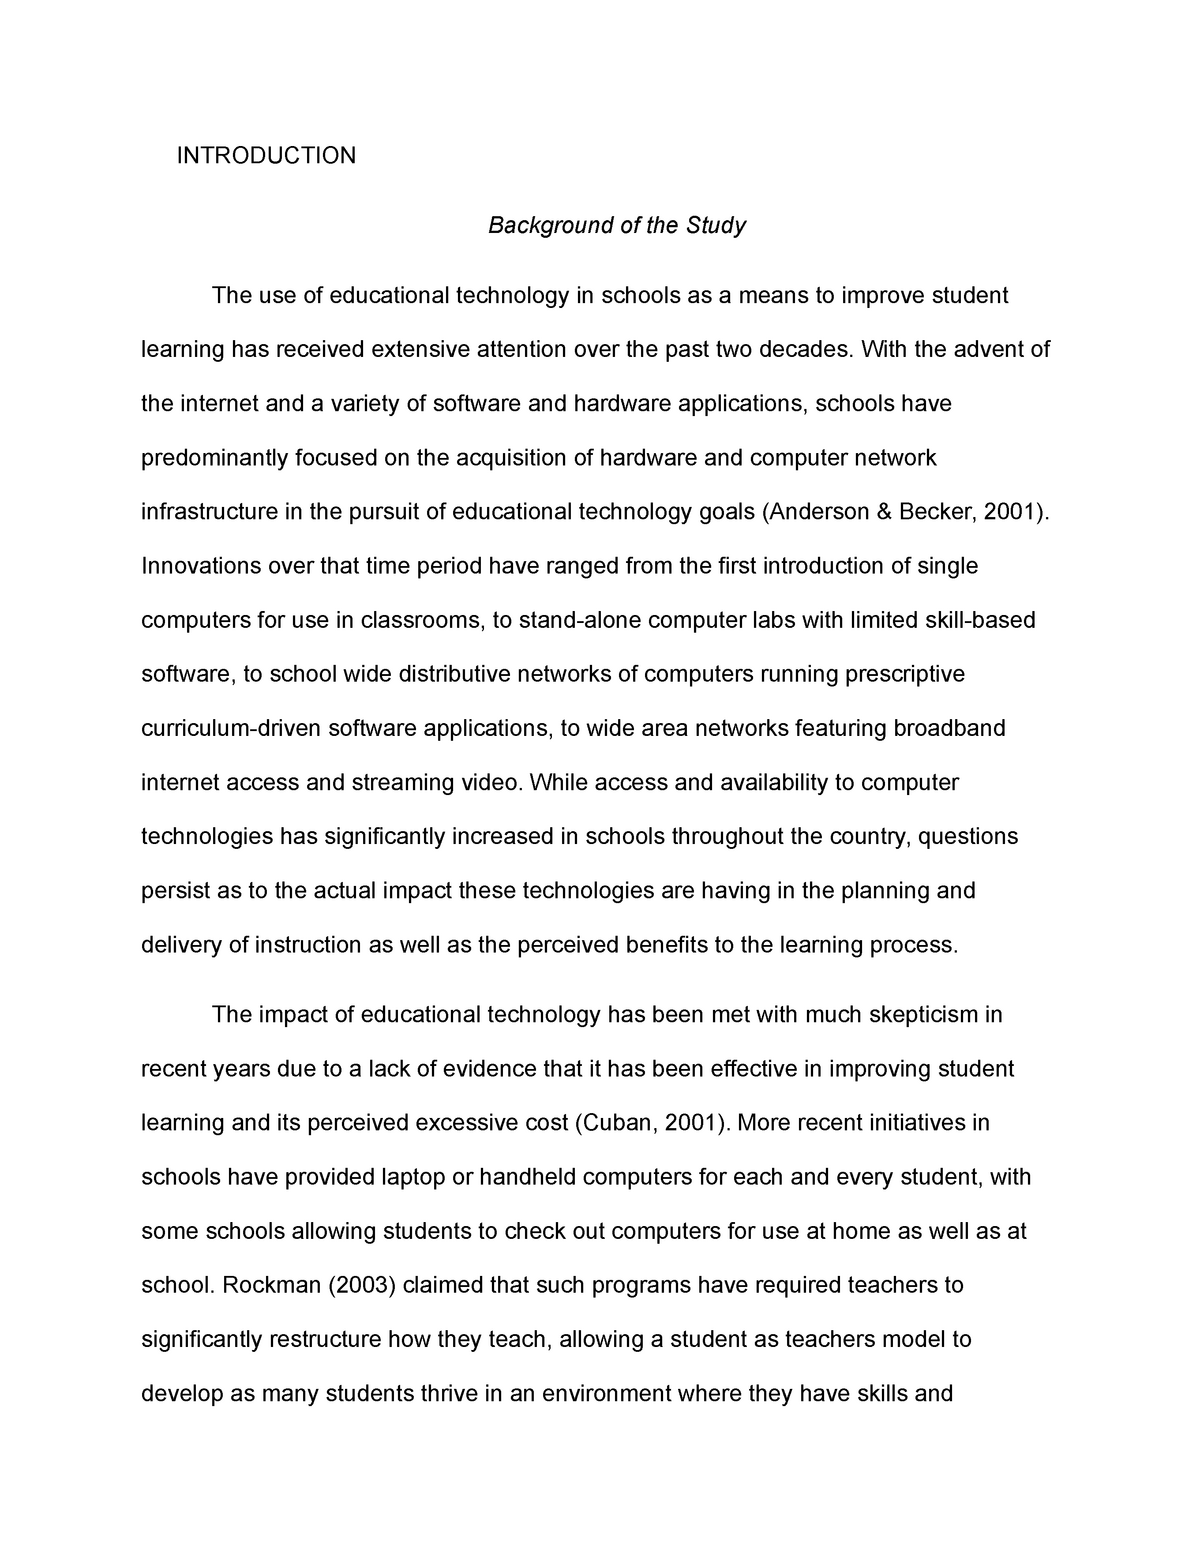 sample of research paper using imrad format